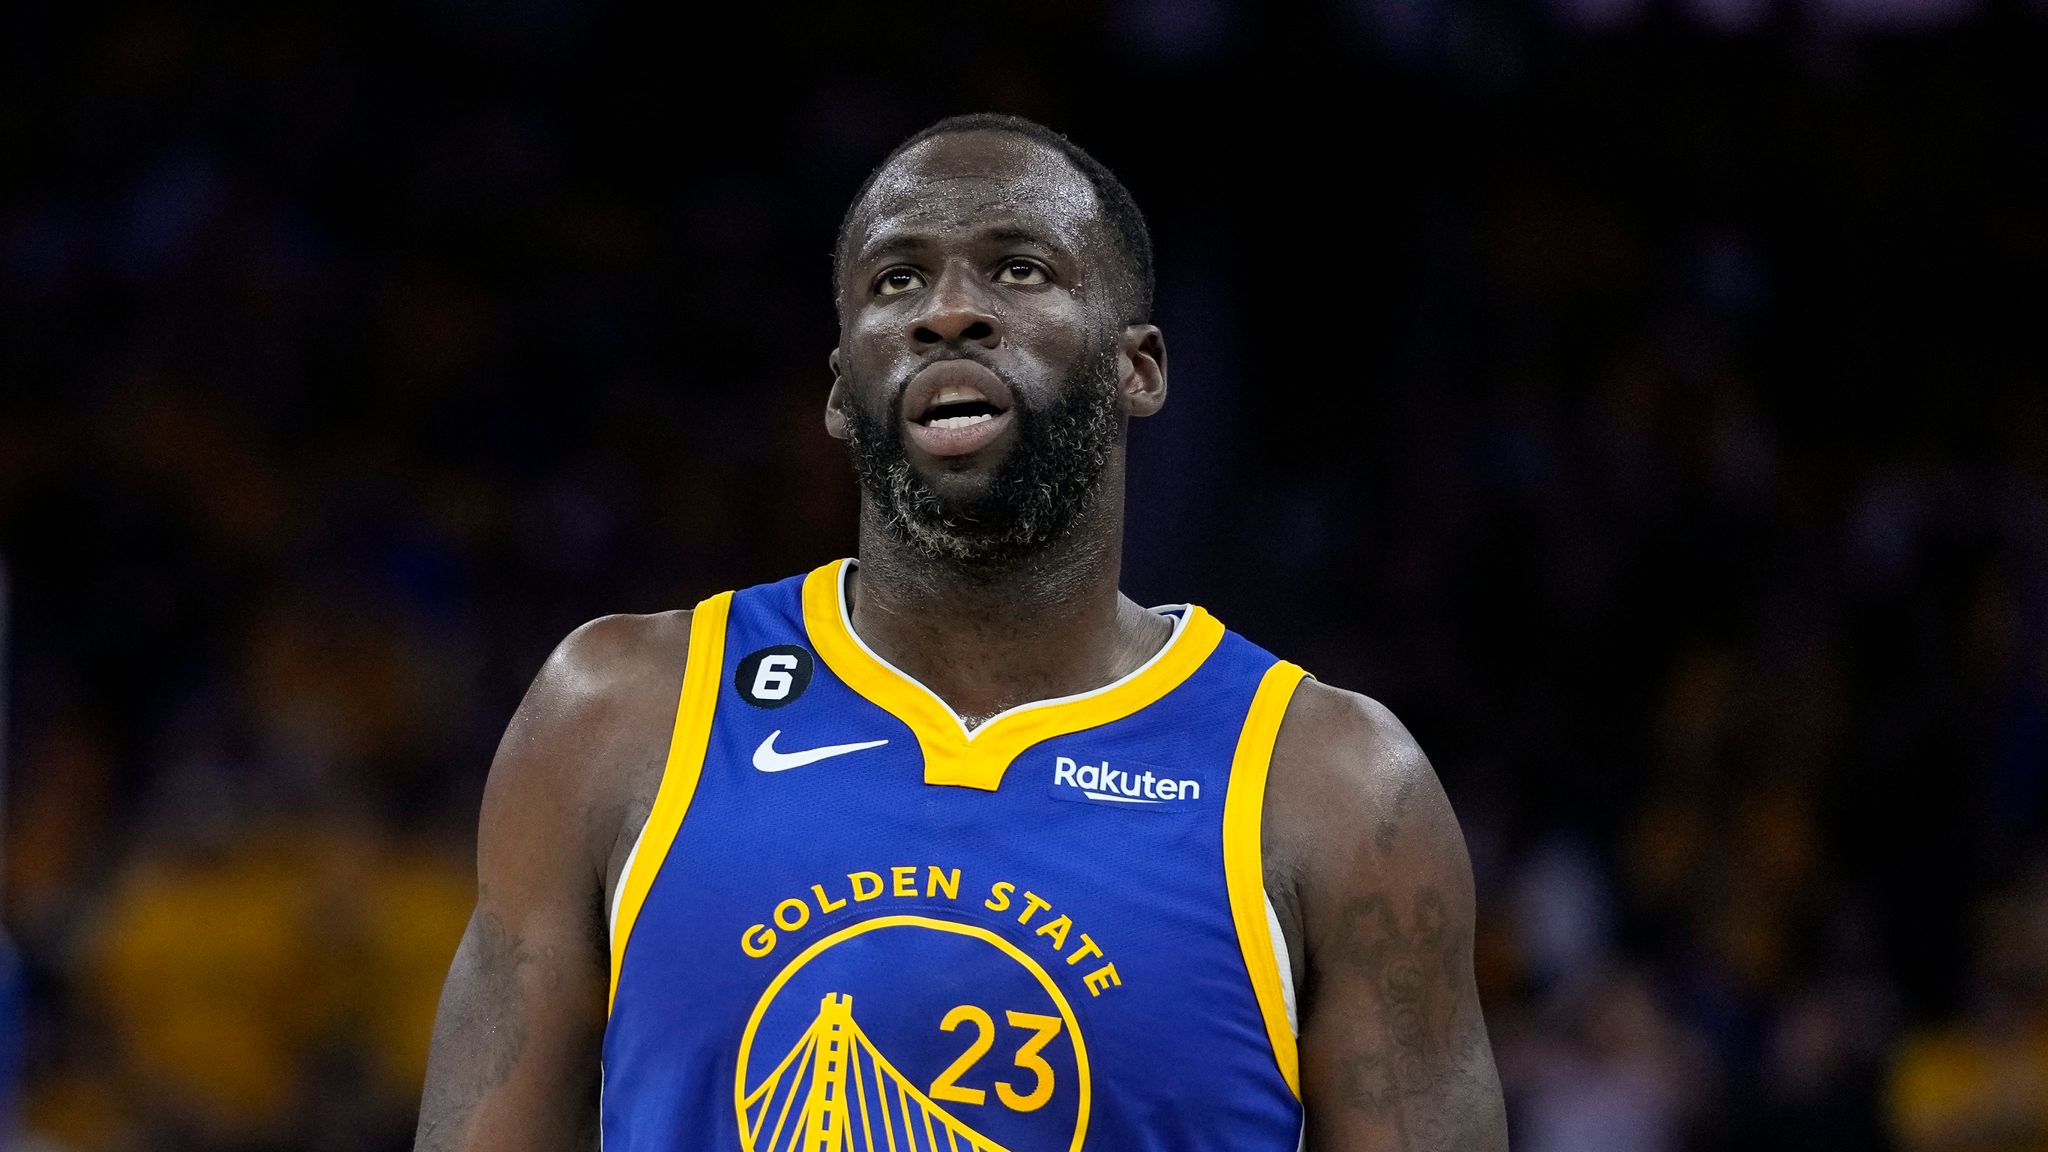 Warriors vs Kings Game 2: Draymond Green ejected for stamp on chest of  Domantas Sabonis in Golden State loss